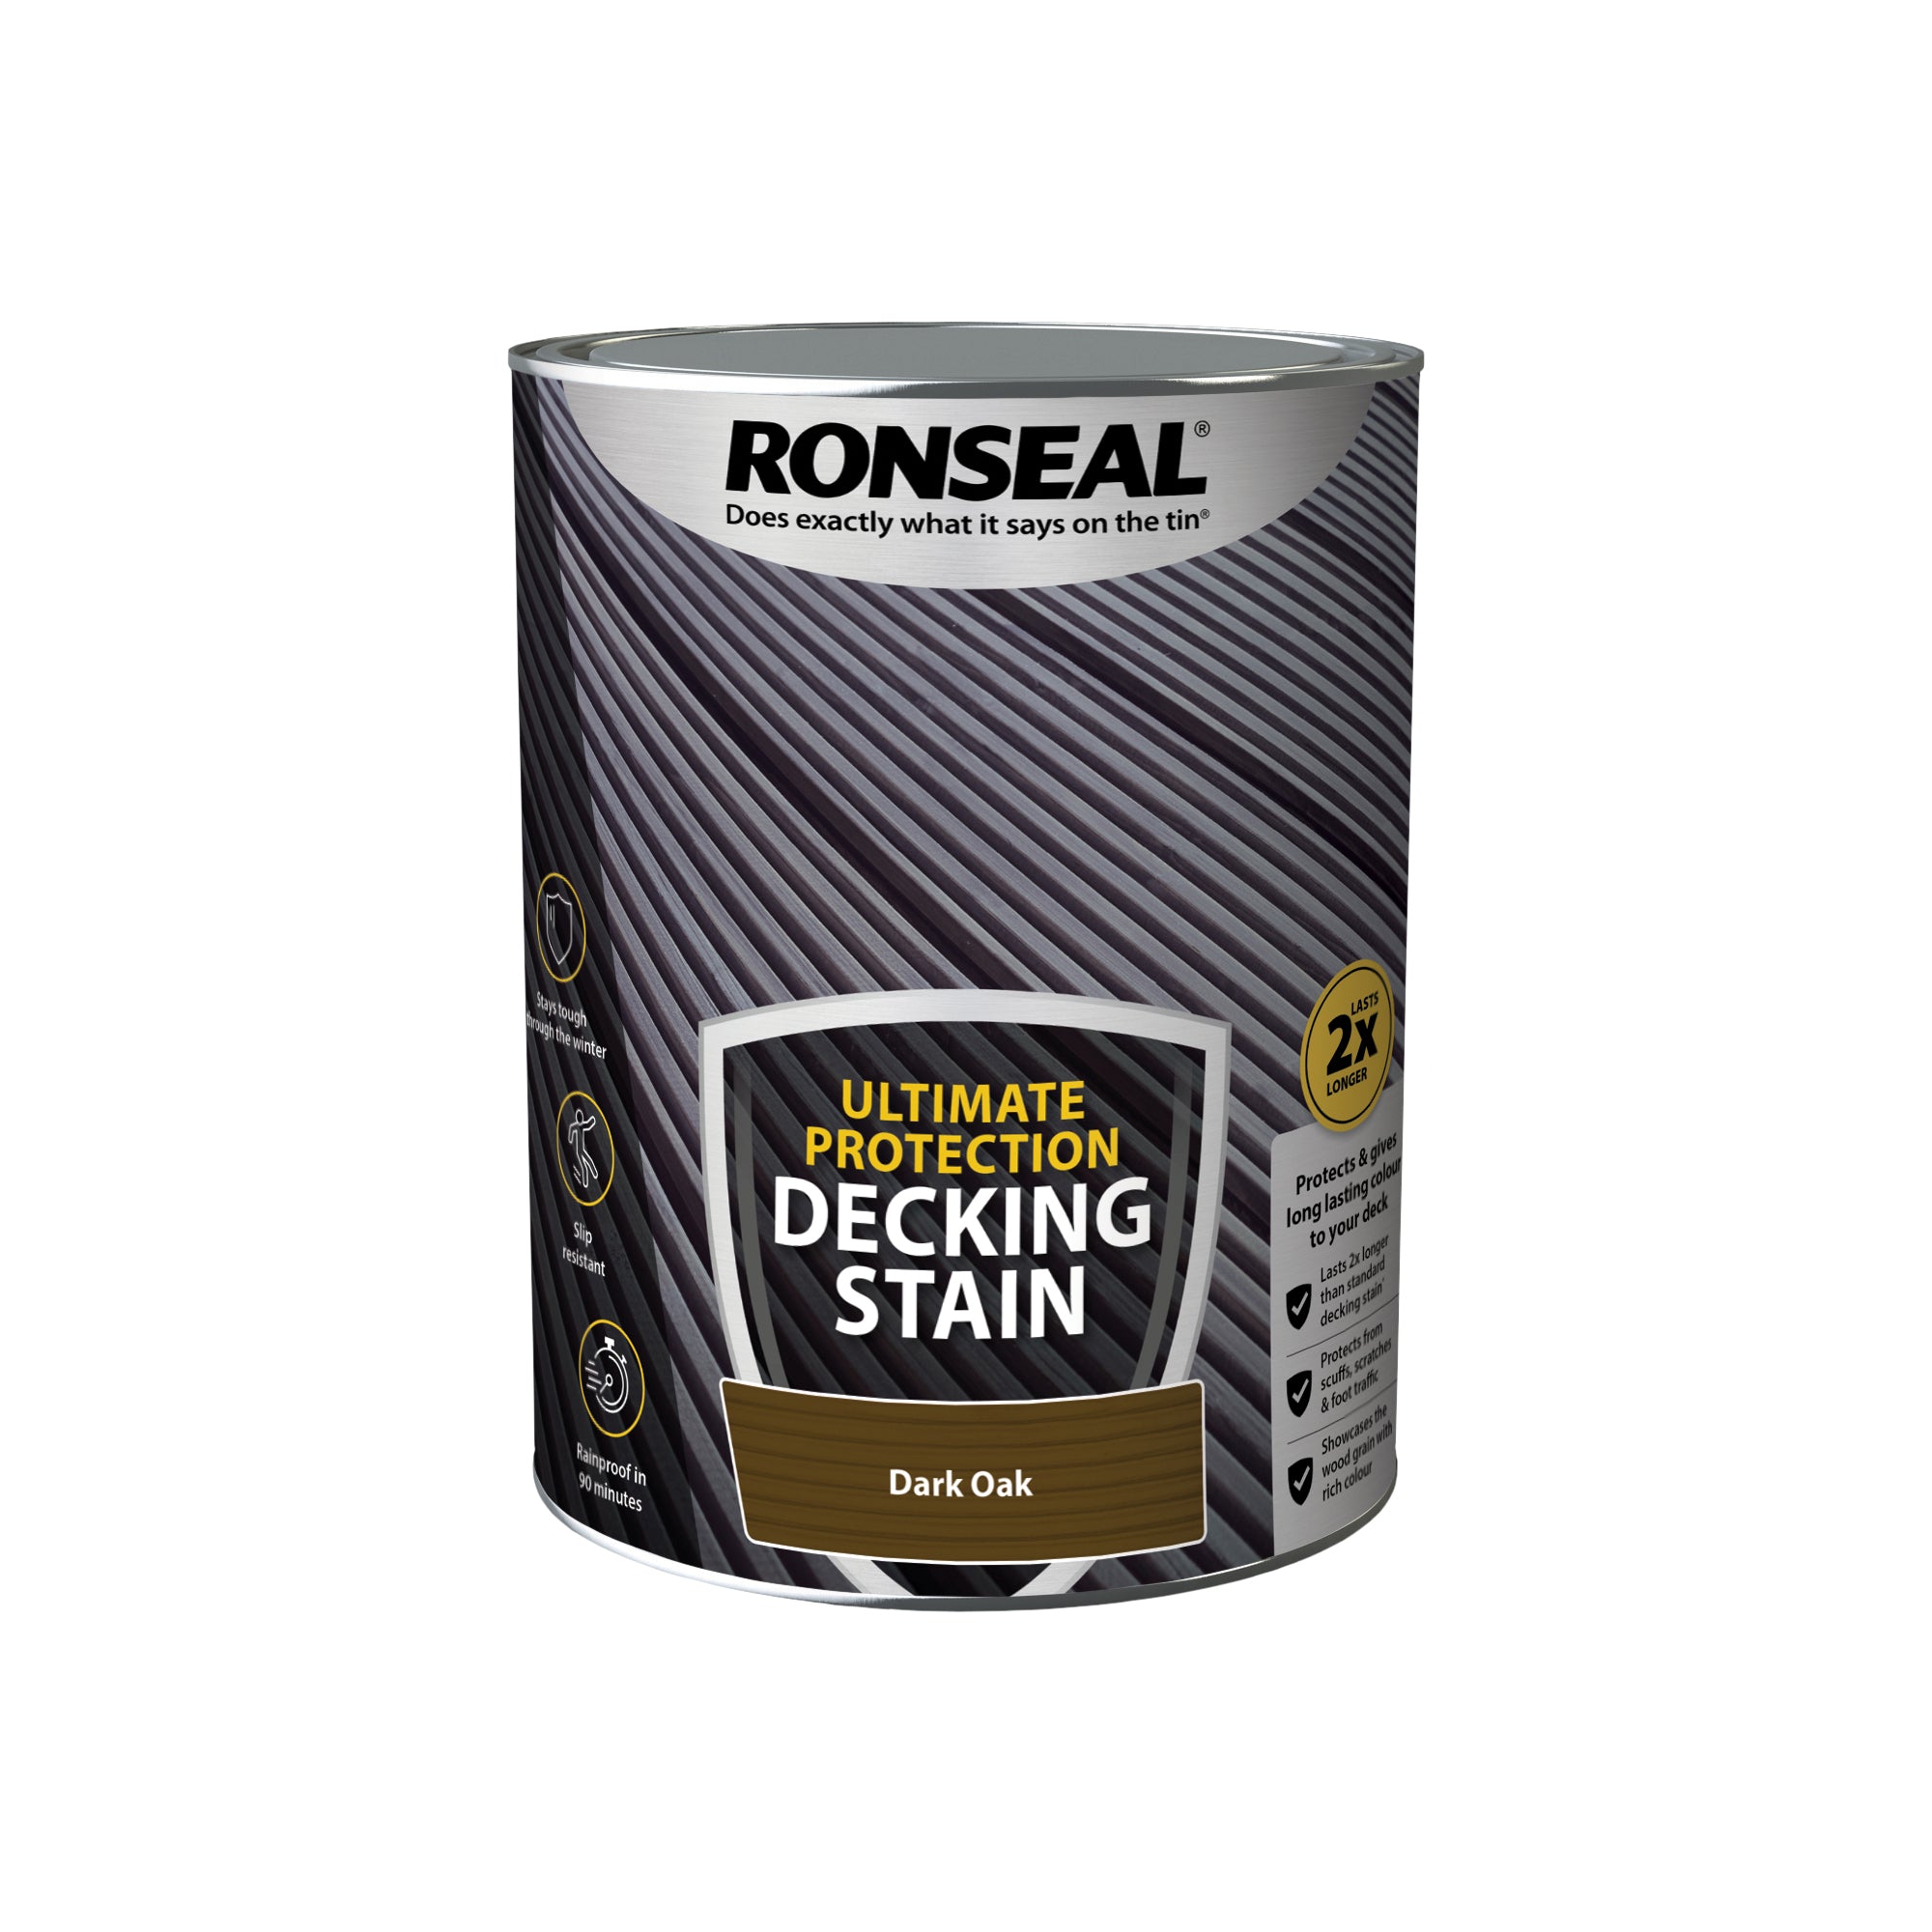 Ronseal-Ultimate-Protection-Decking-Stain-Dark-Oak-5L